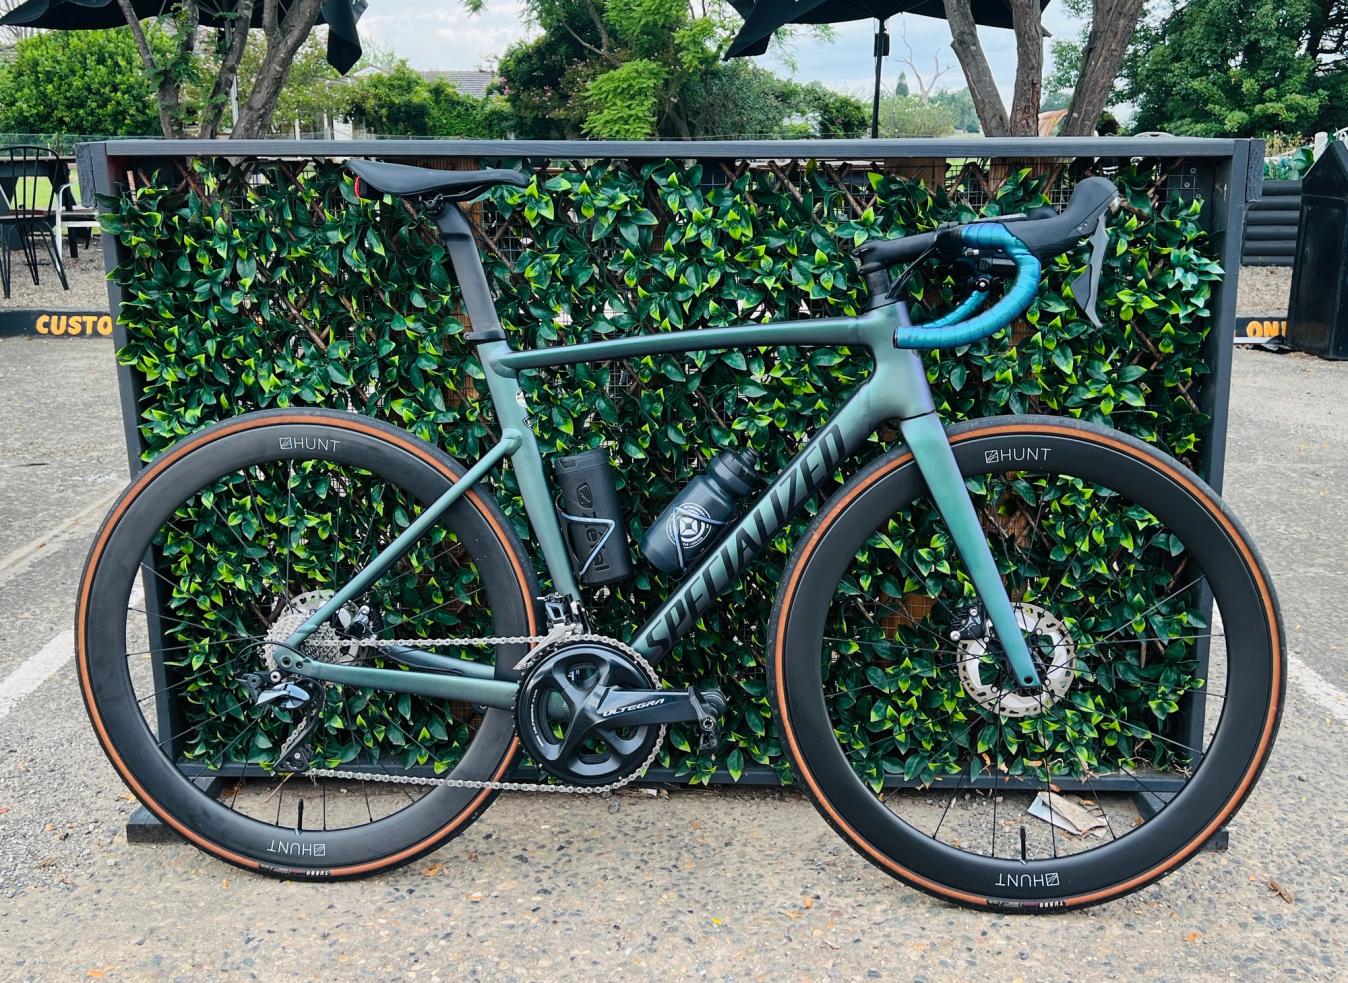 The Allez is Specialized's aluminium road bike and this one has been upgraded with 50mm Hunt wheels and very eye-catching Supacaz bar tape